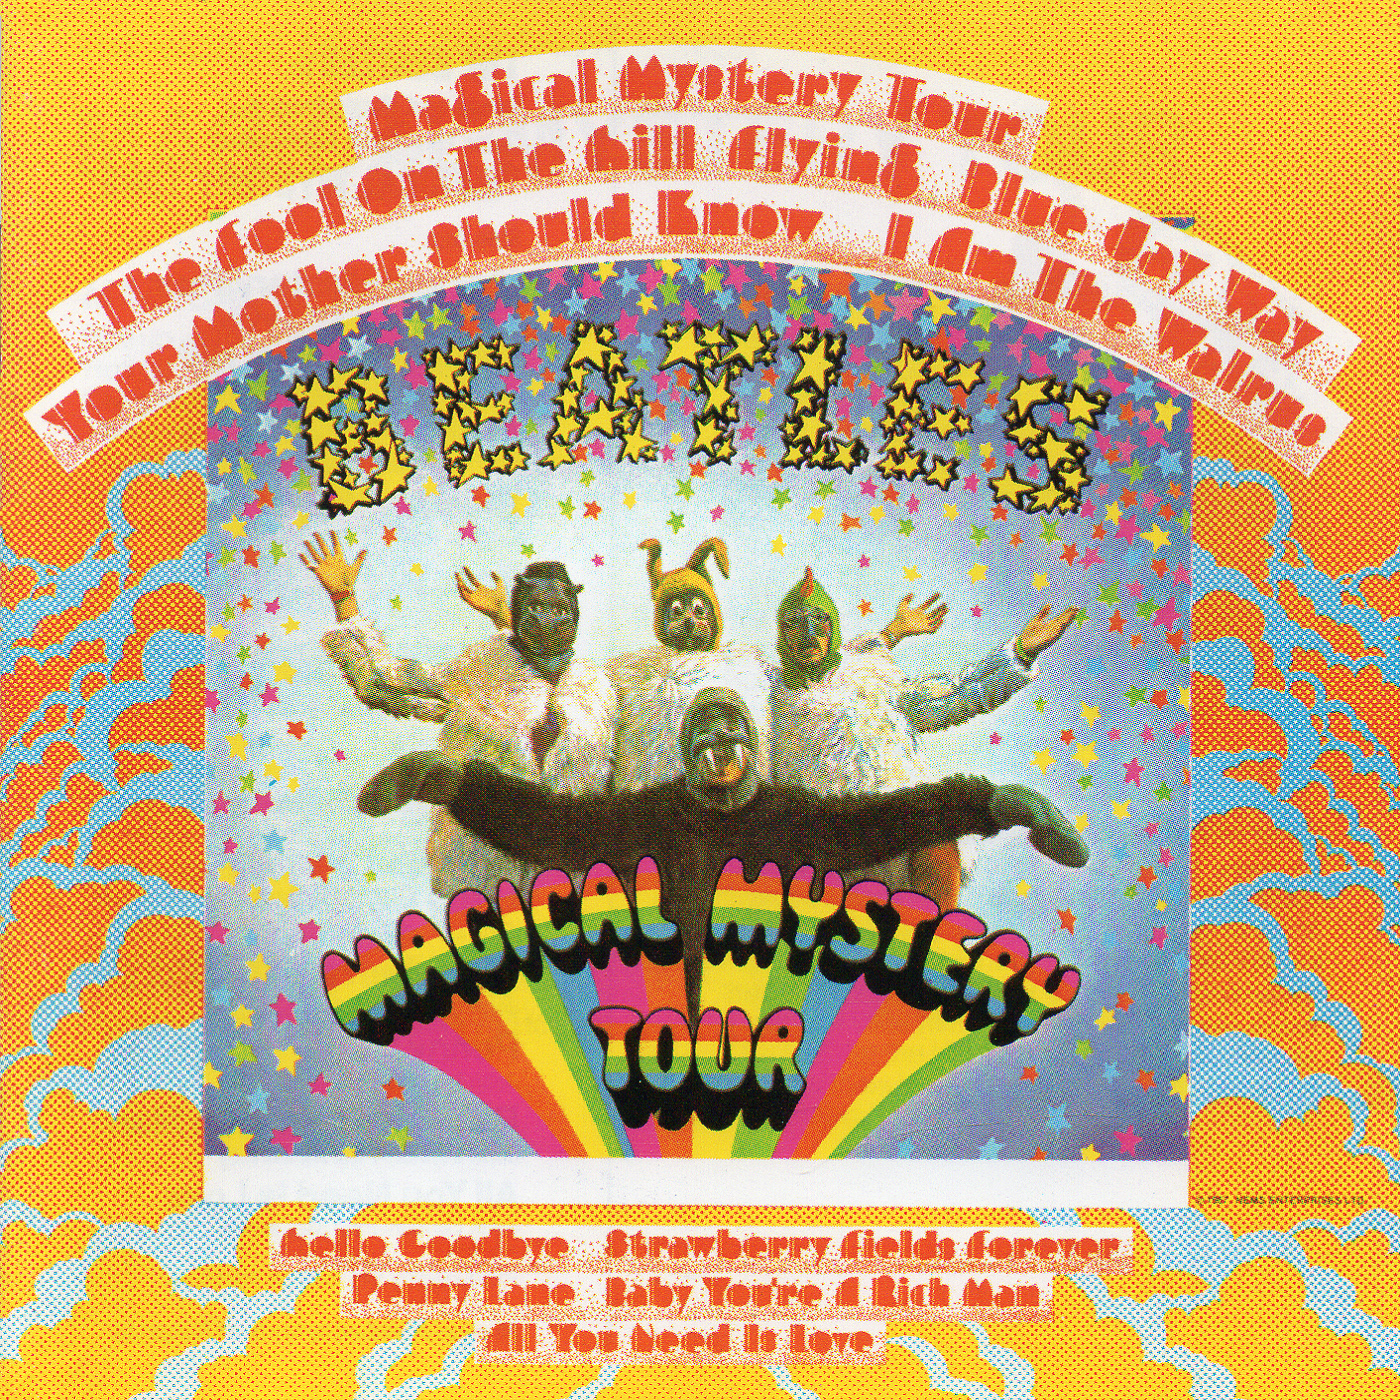 The Beatles-1967-Magical Mystery Tour CDP 7 48062 2